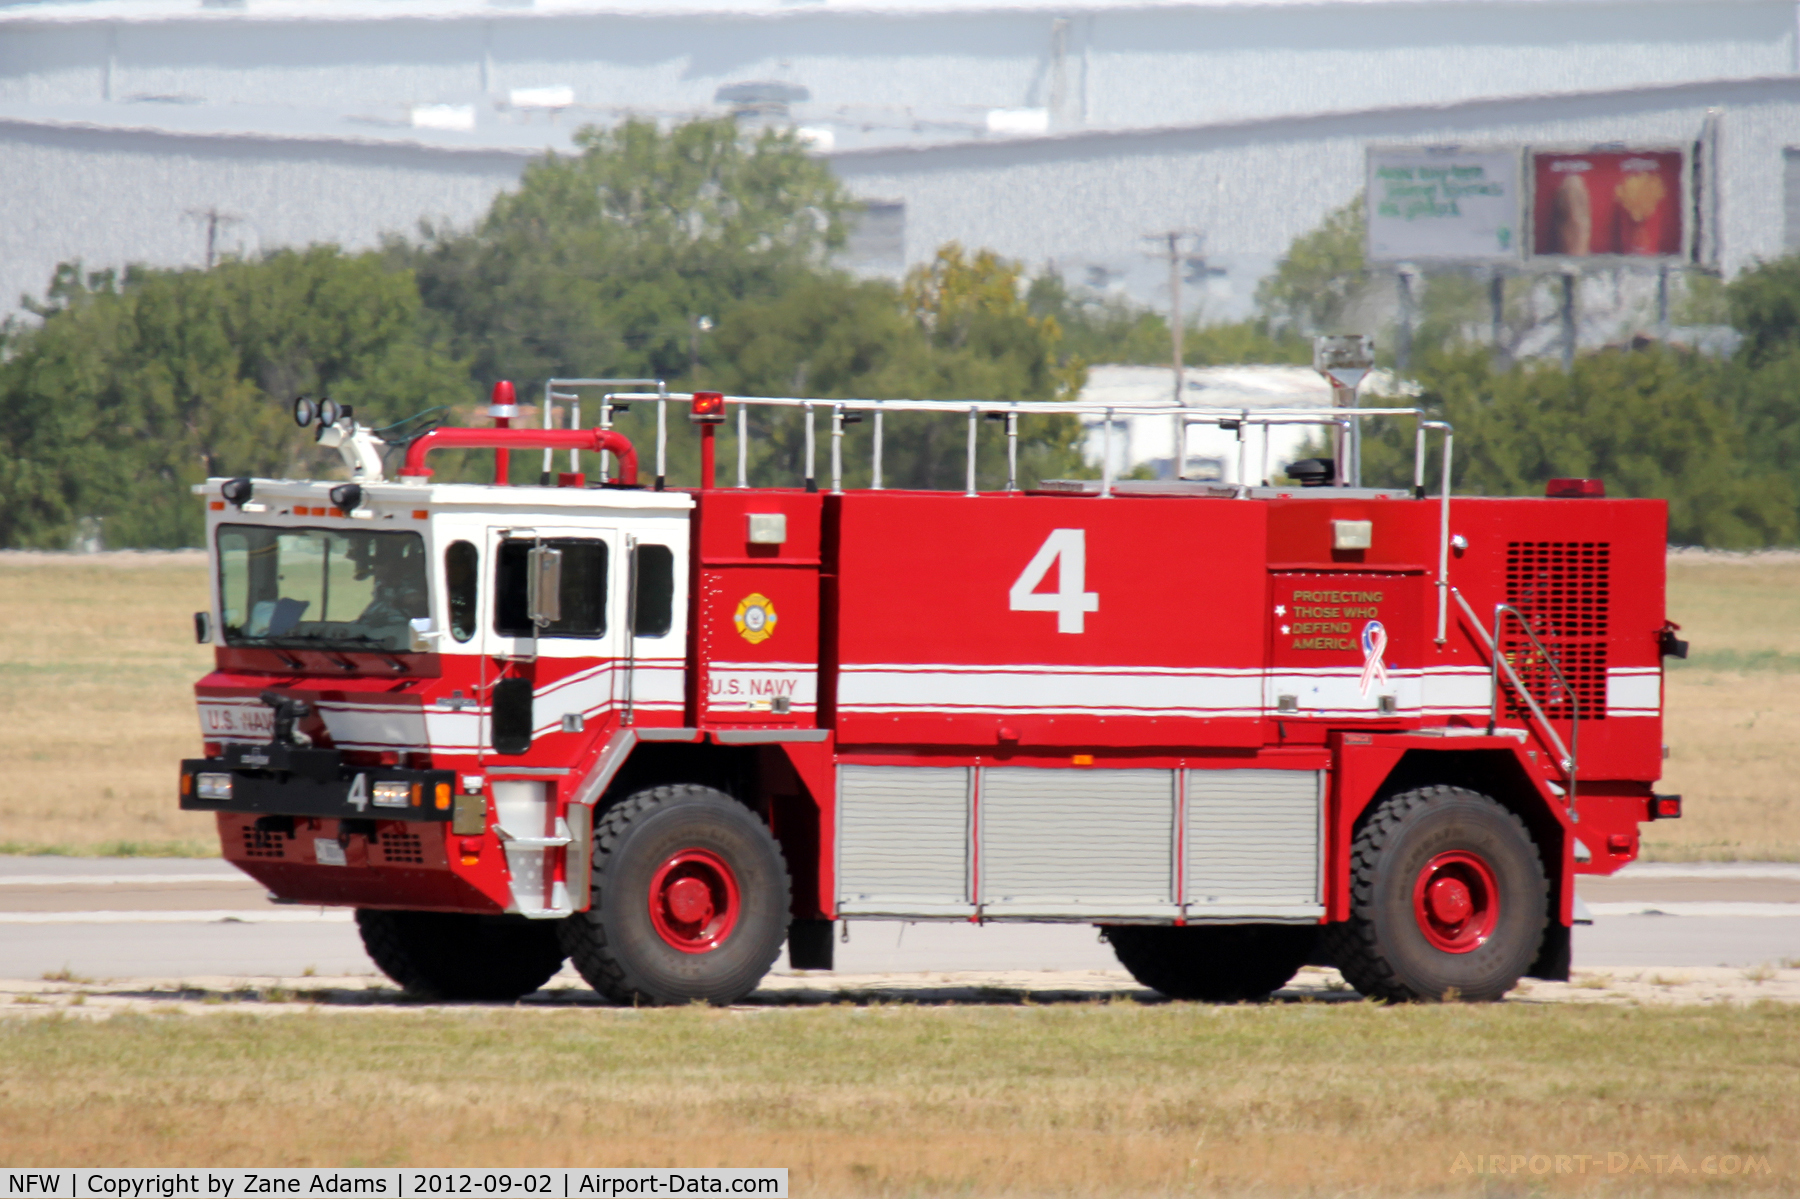 Fort Worth Nas Jrb/carswell Field Airport (NFW) - NAS Fort Worth fire truck #4